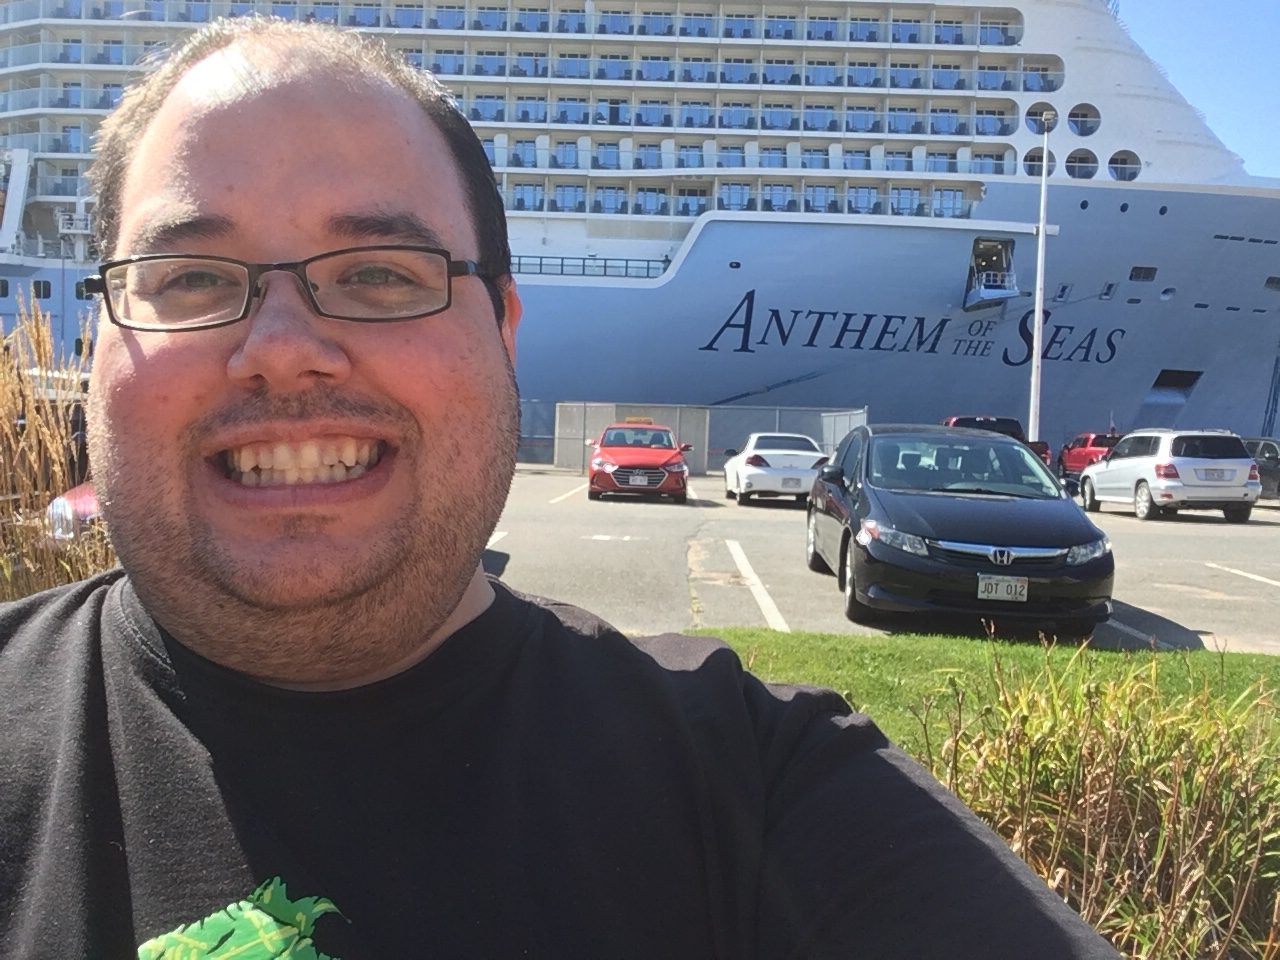 My Day on the Anthem of the Seas